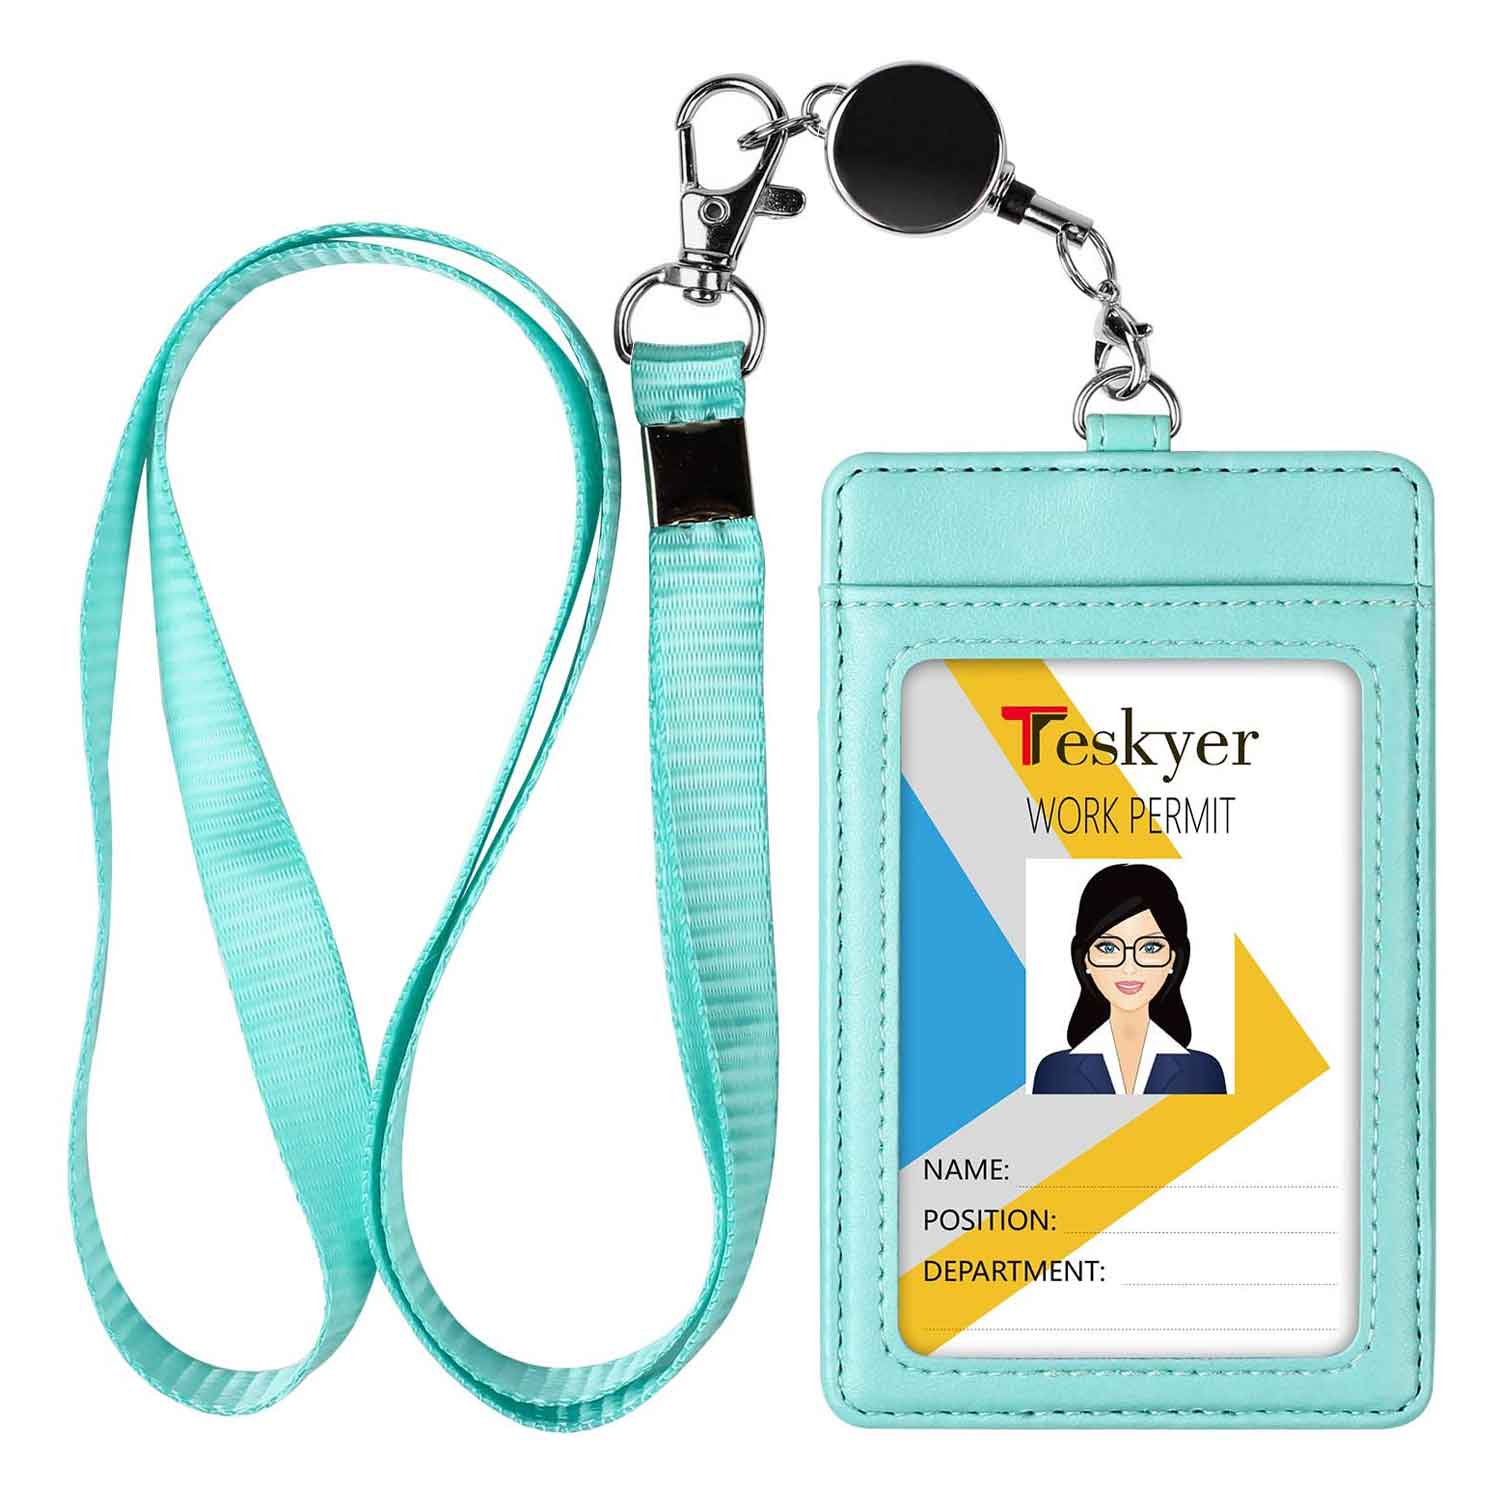 Wisdompro Badge Holder with Retractable Reel, Vertical PU Leather ID Card  Holder with Side Zipper Po…See more Wisdompro Badge Holder with Retractable